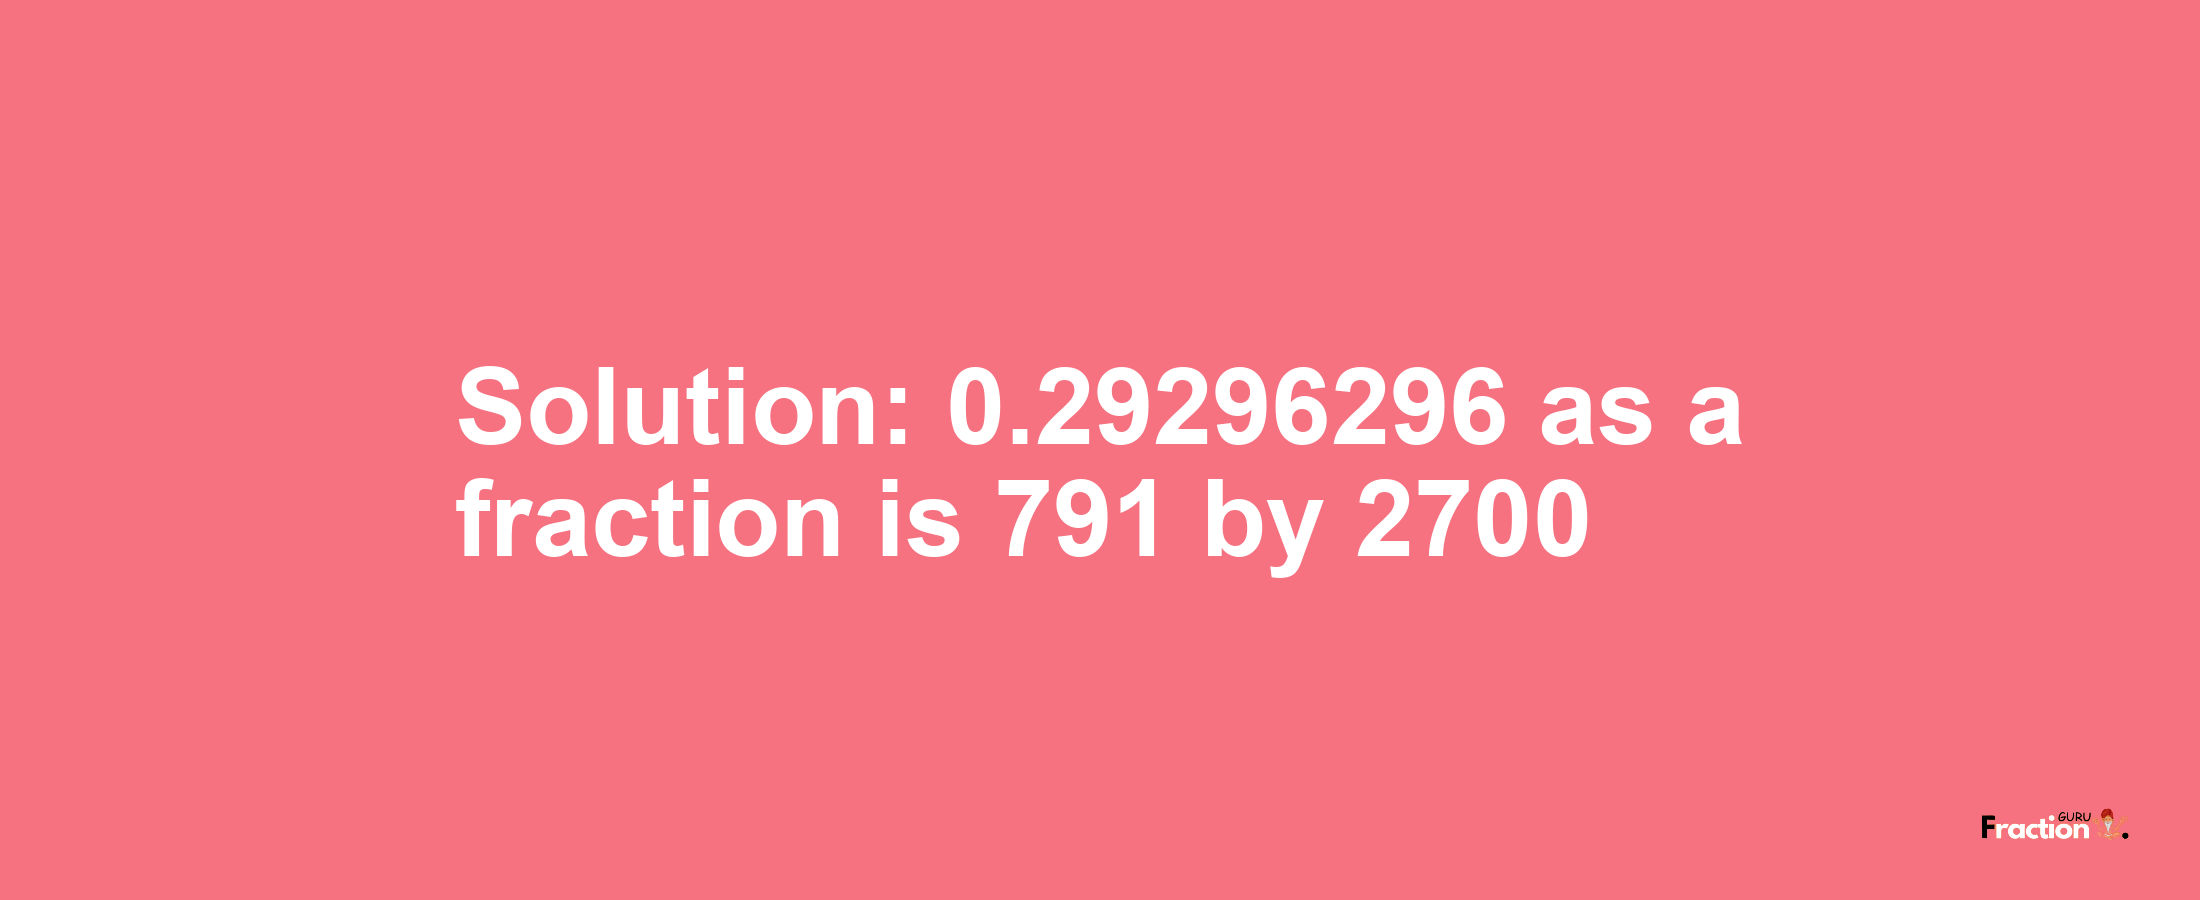 Solution:0.29296296 as a fraction is 791/2700